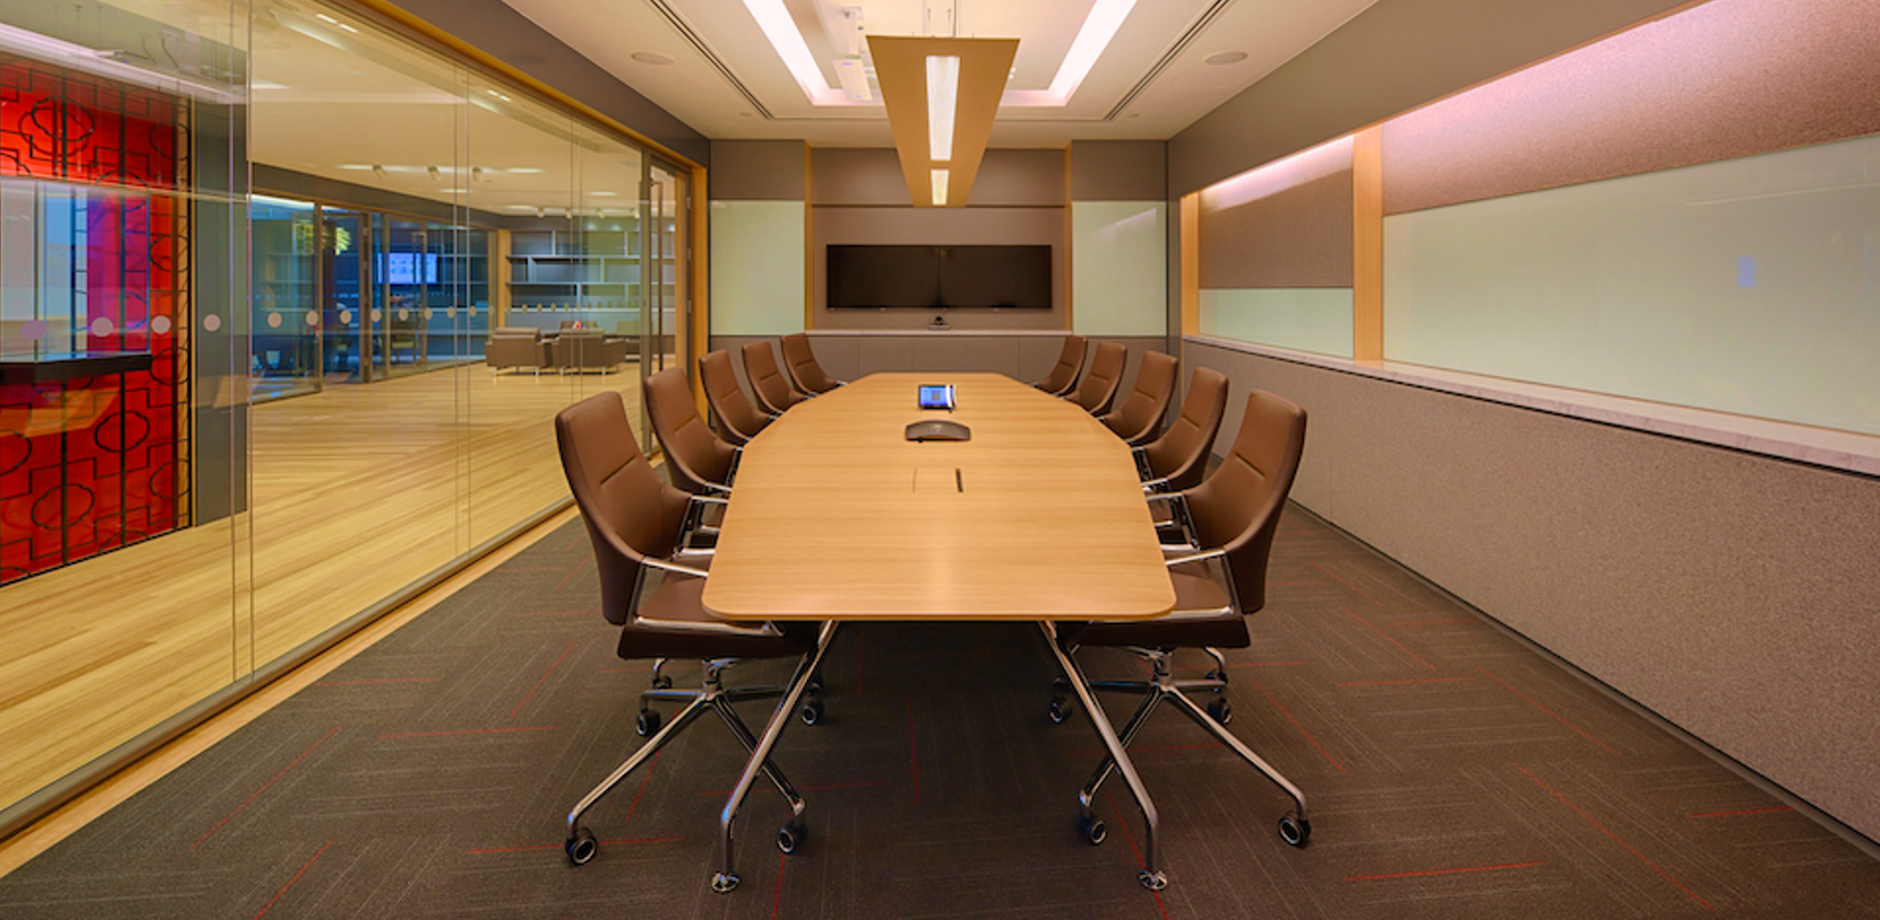 Conference room - office furniture 